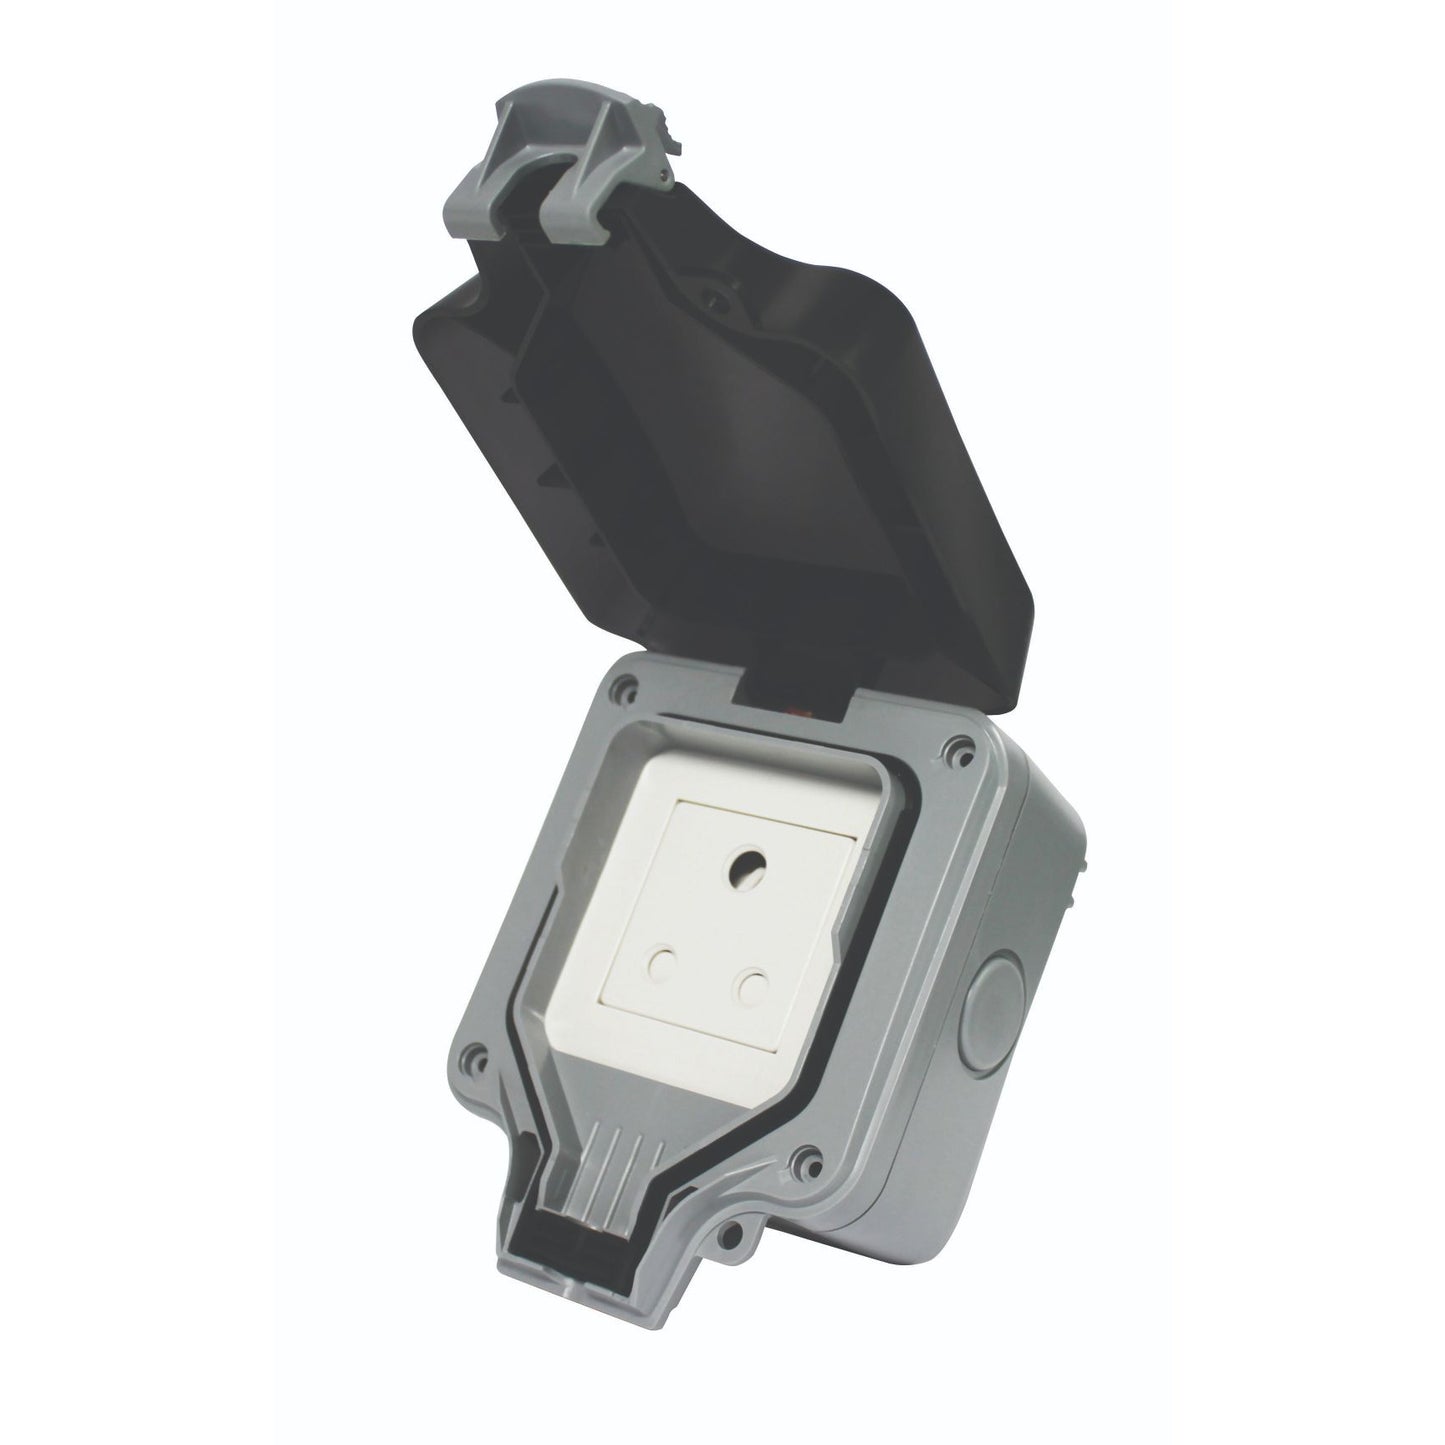 IP66 SINGLE UNSWITCHED 16A SA OUTDOOR SOCKET (1 X 3 PIN)